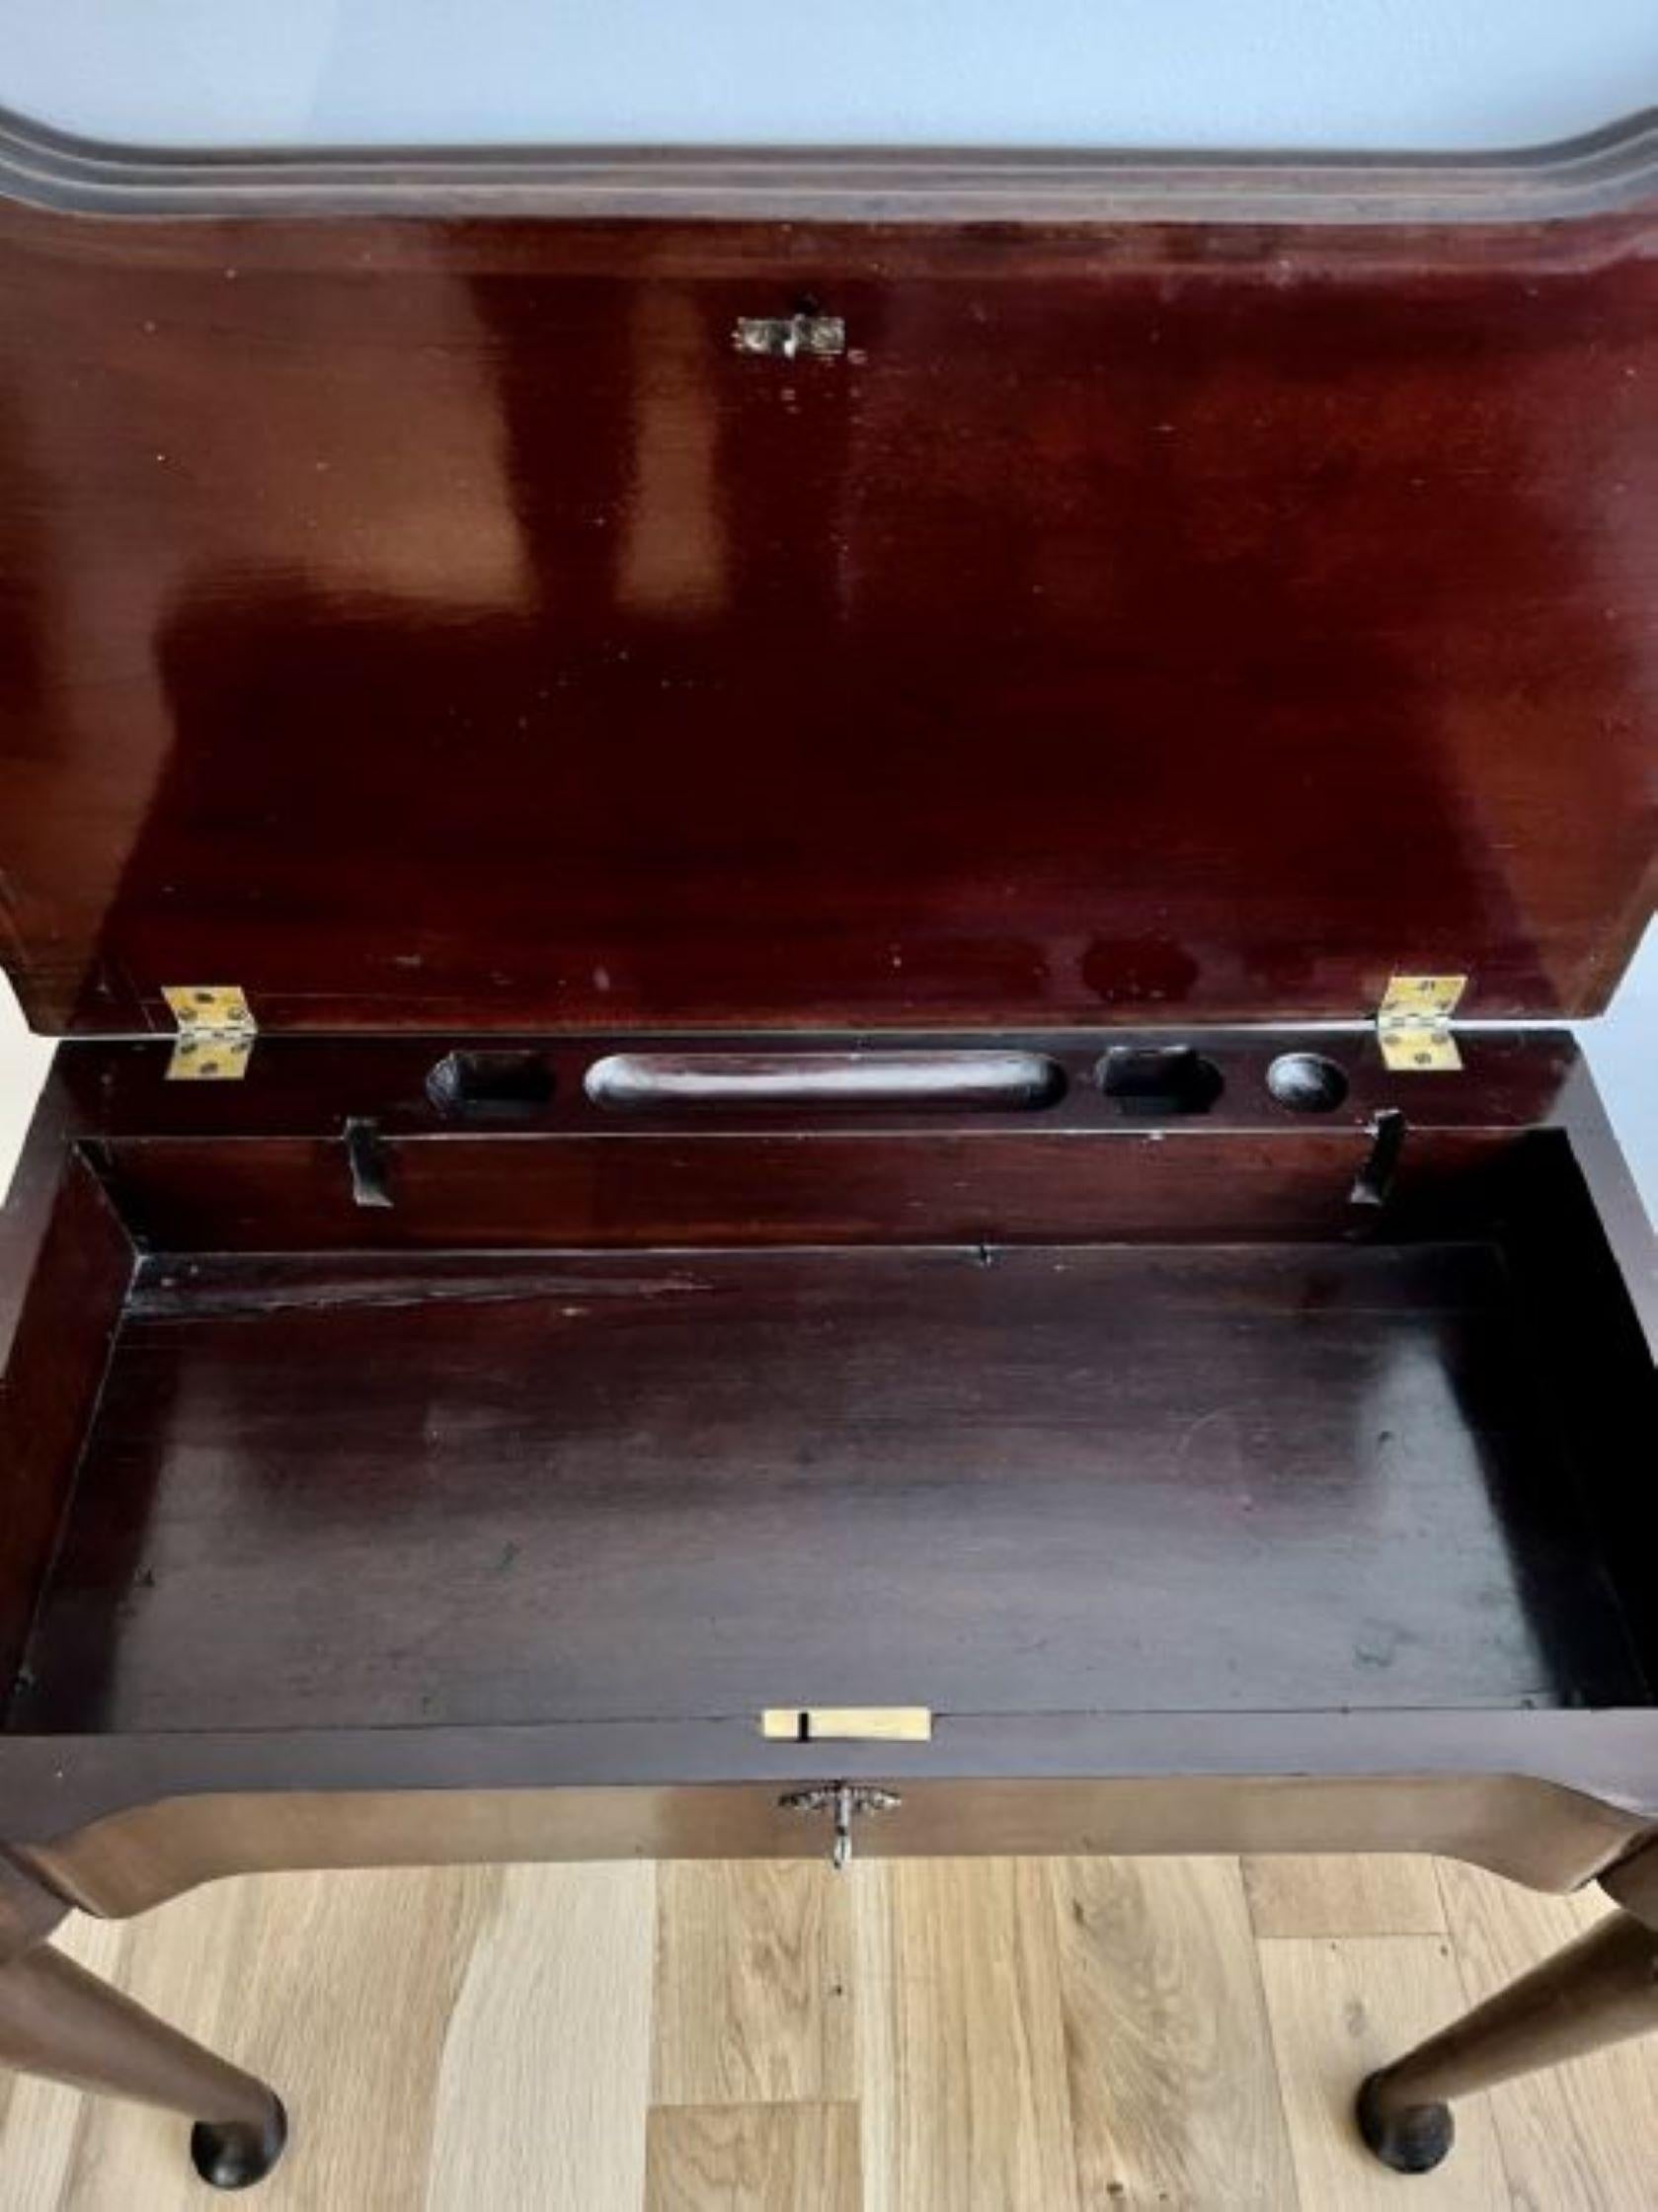 Outstanding quality antique George III mahogany games table having a quality treble mahogany fold over shaped top opening to reveal a backgammon games board, opening again to reveal a green baize interior with mahogany wells and opening again to